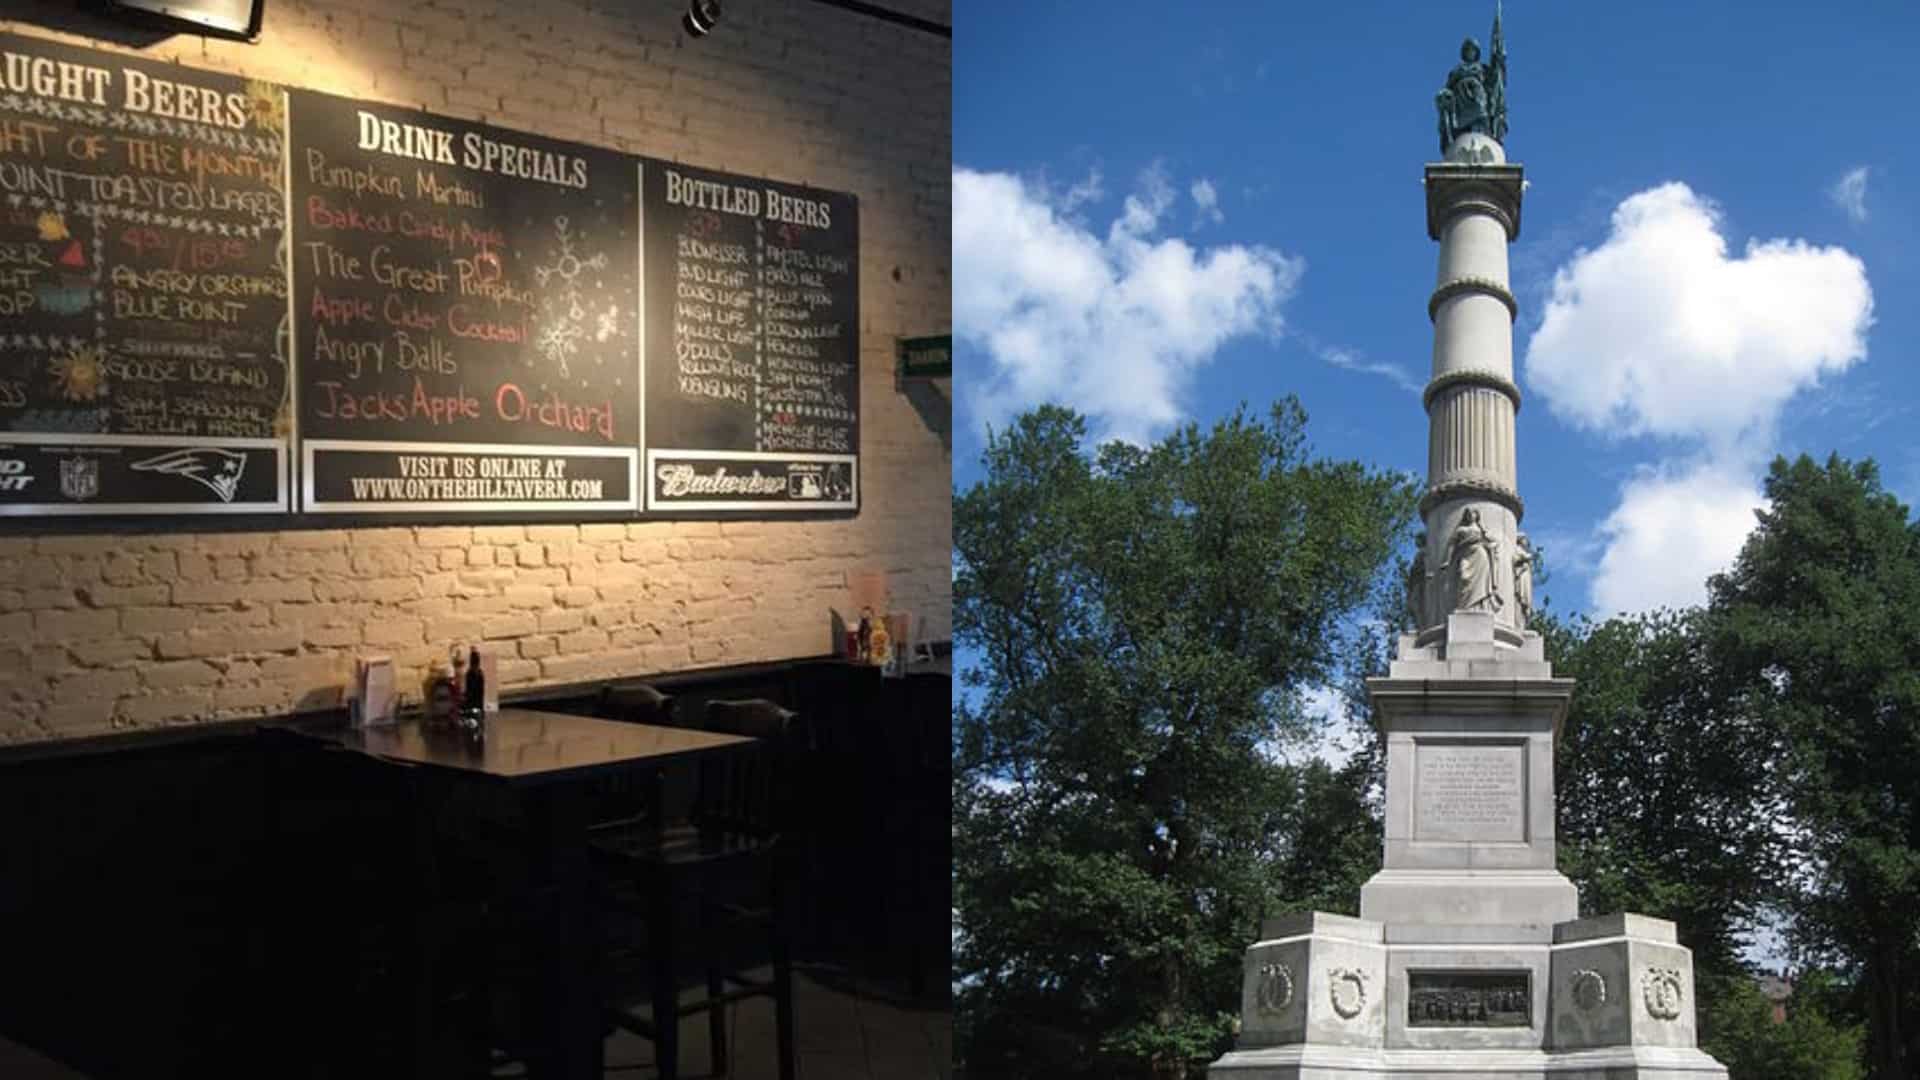 Hill Tavern and Sodier and Sailors Monument